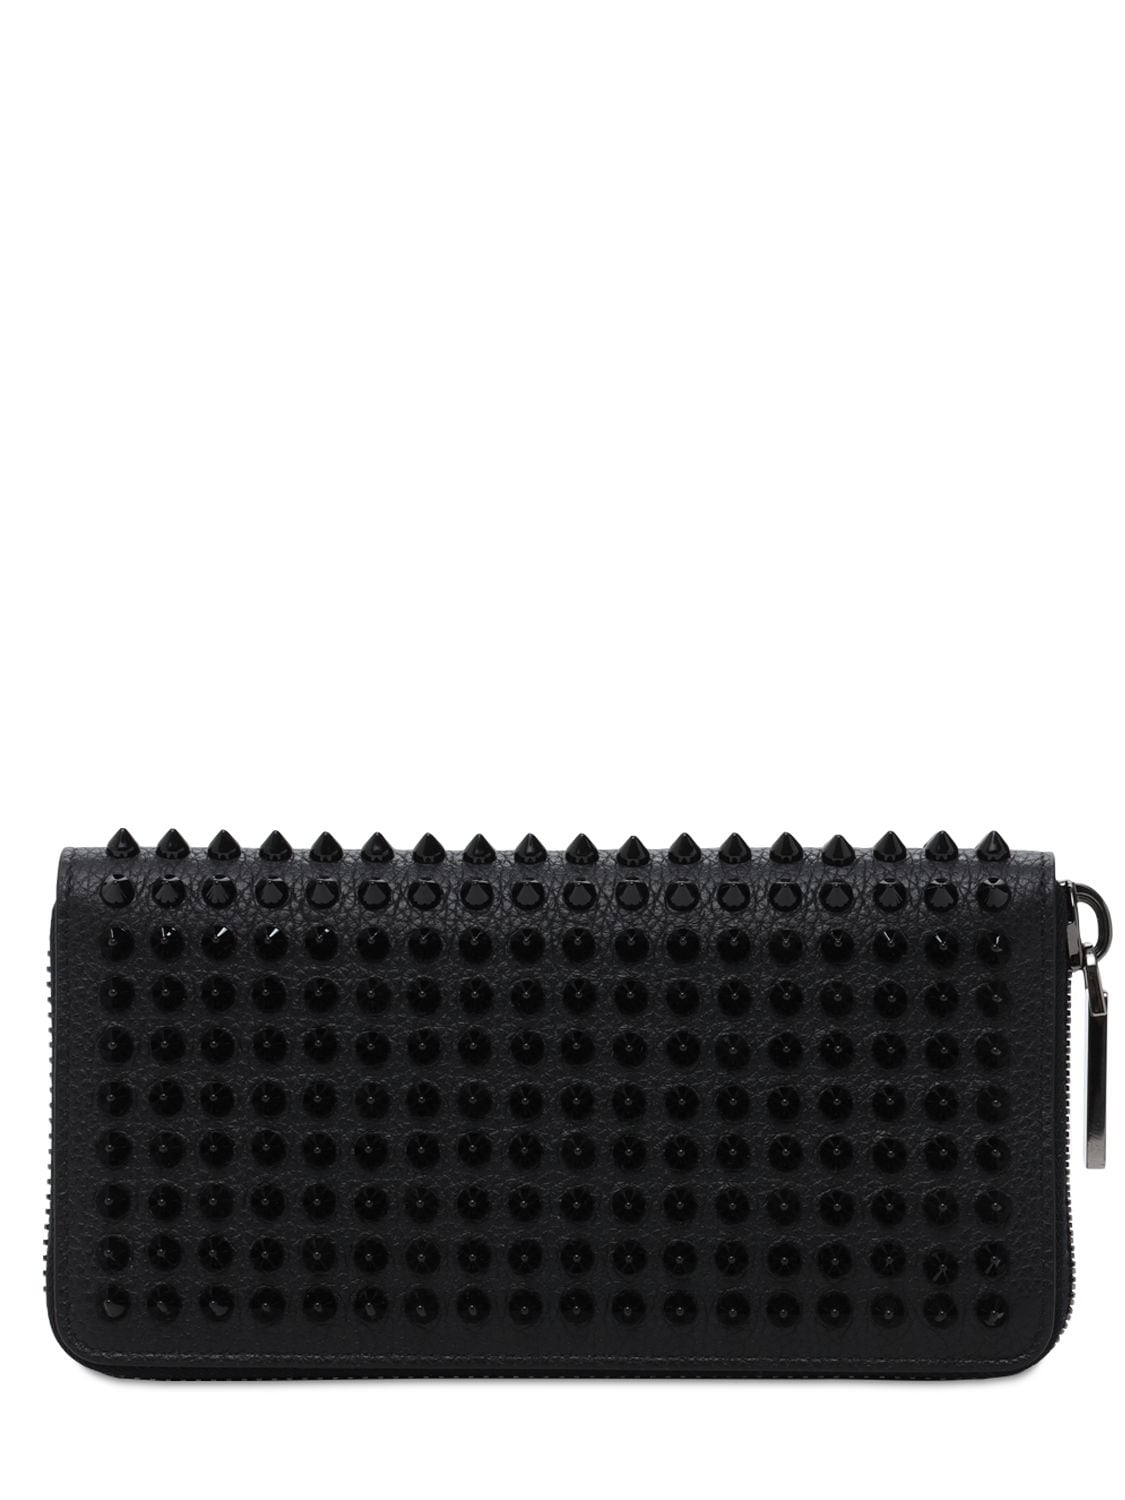 Christian Louboutin Panettone Spiked Leather Zip Wallet In Black